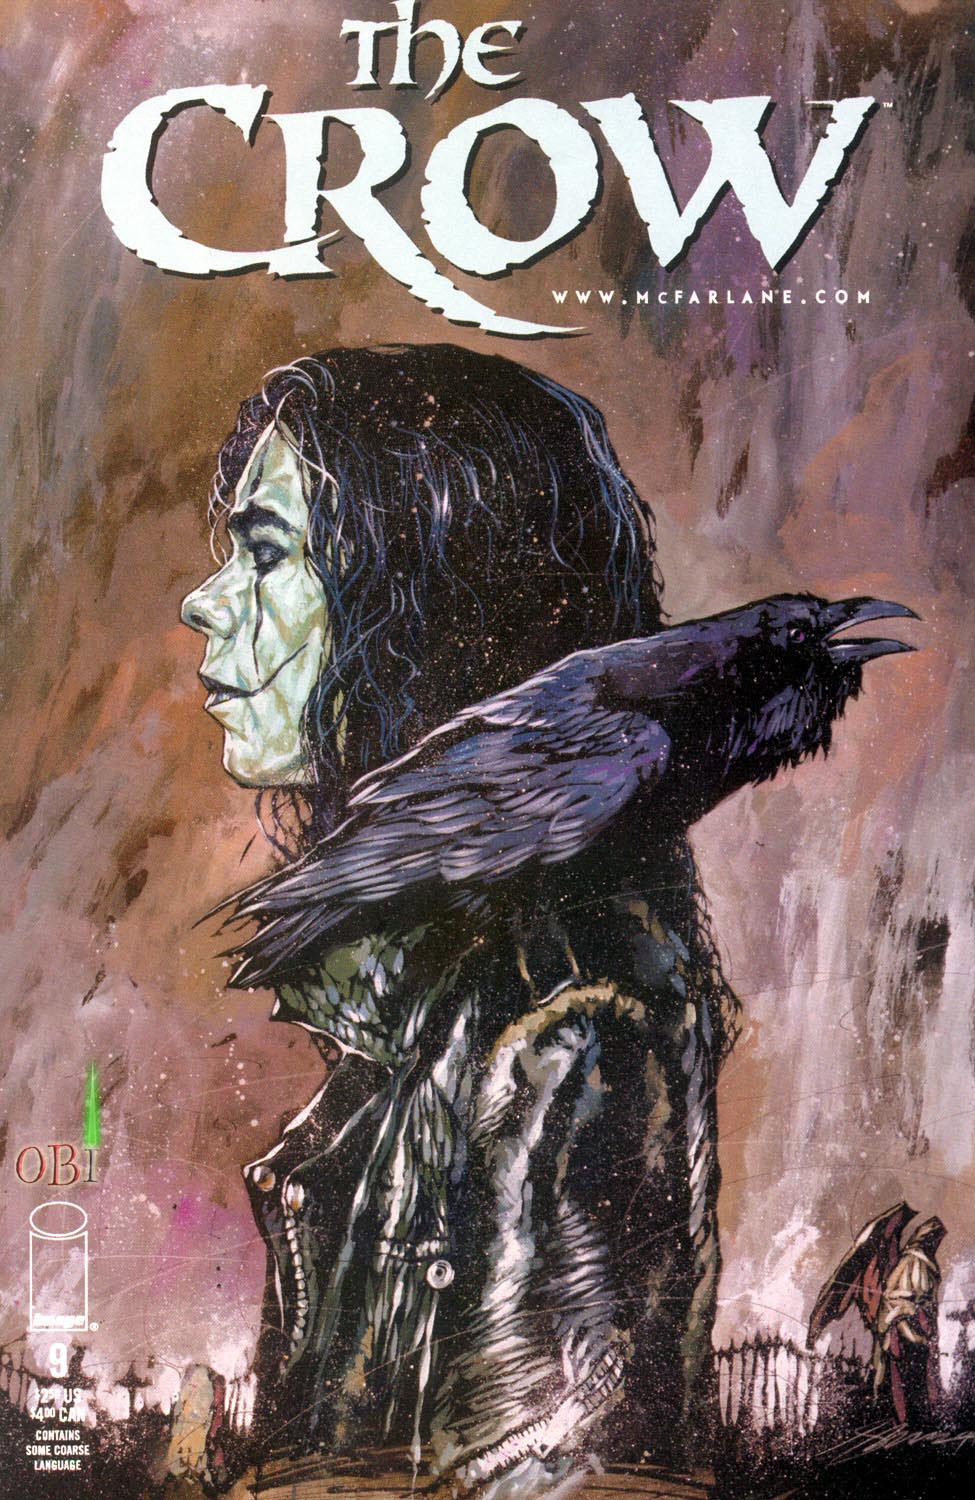 The crow online free